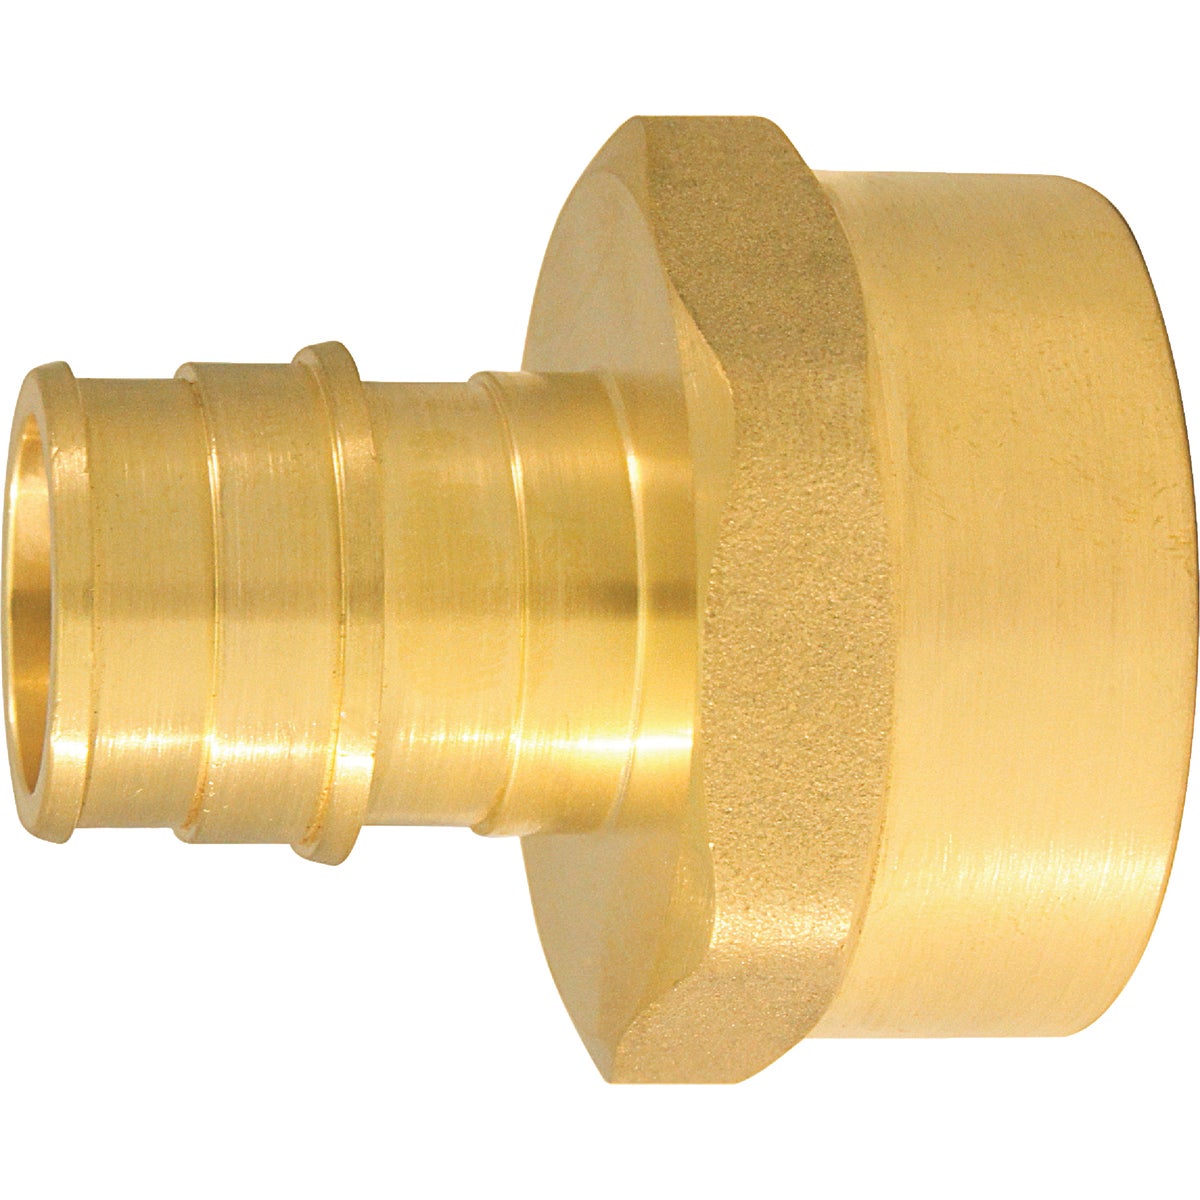 Apollo Retail 3/4 In. x 1 In. Brass Insert Fitting FIP PEX A Adapter